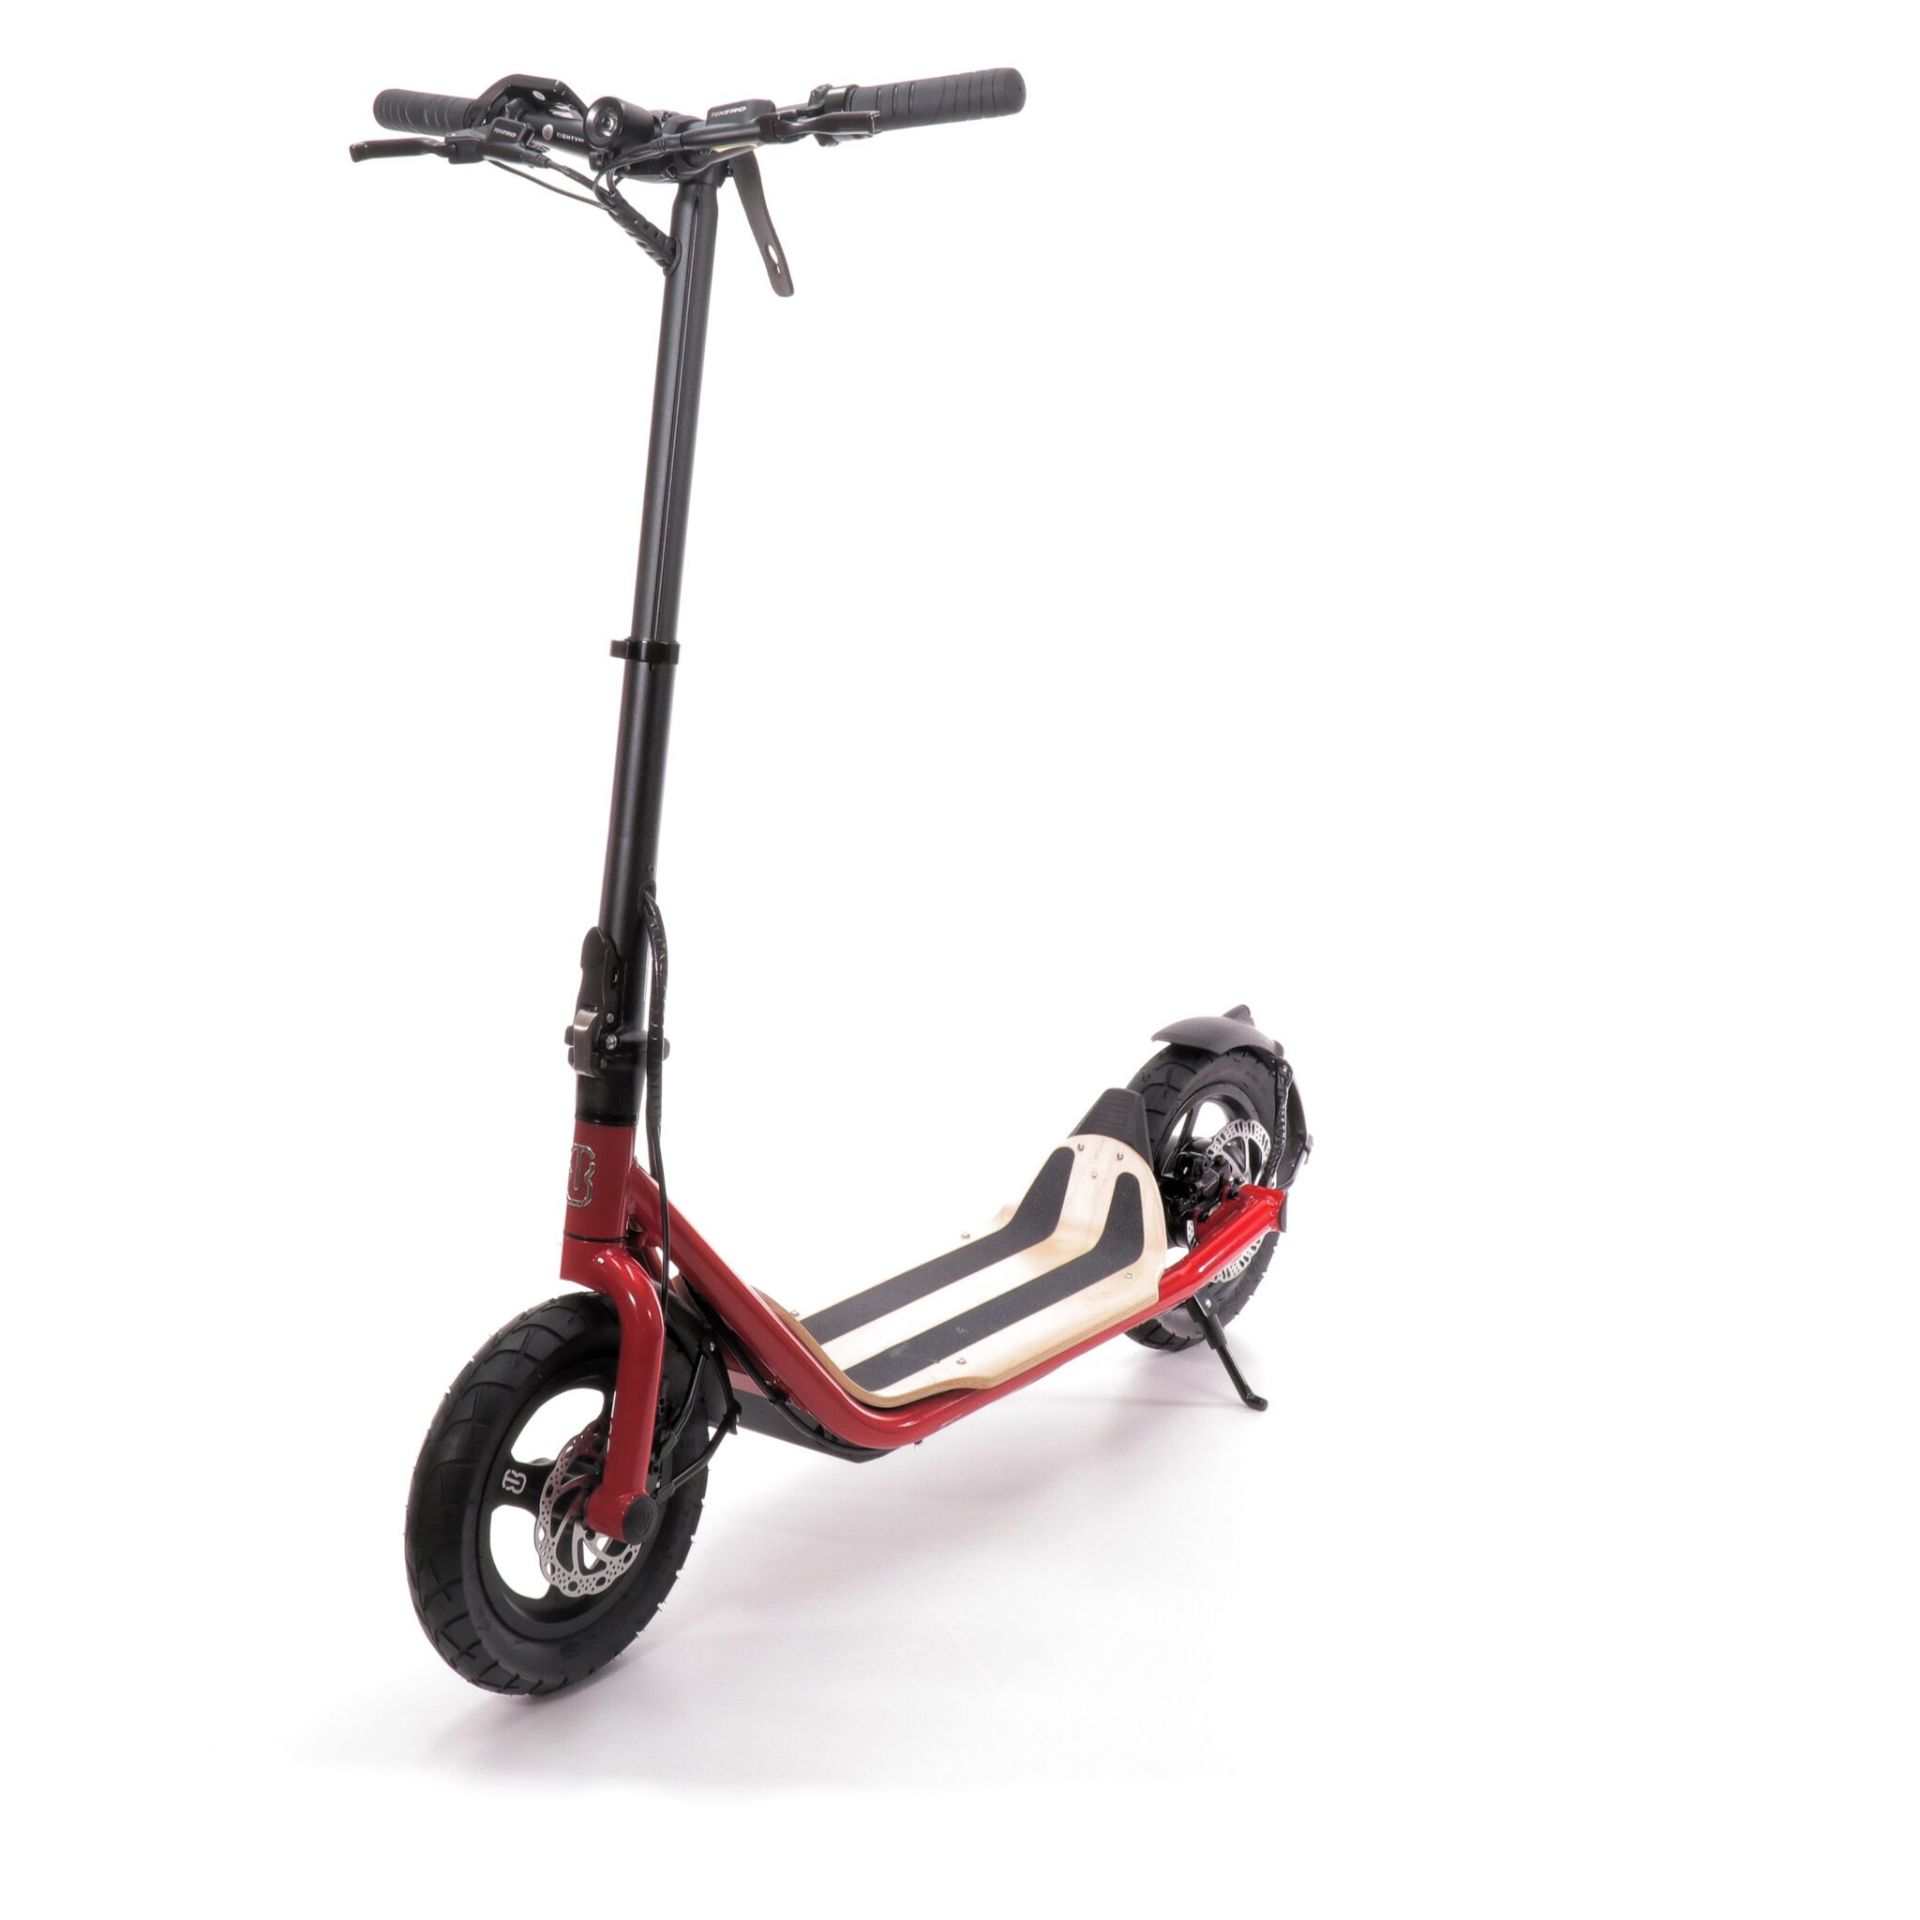 BRAND NEW 8TEV B12 PROXI CLASSIC ELECTRIC SCOOTER RED RRP £1299, Perfect city commuter vehicle - Image 2 of 3